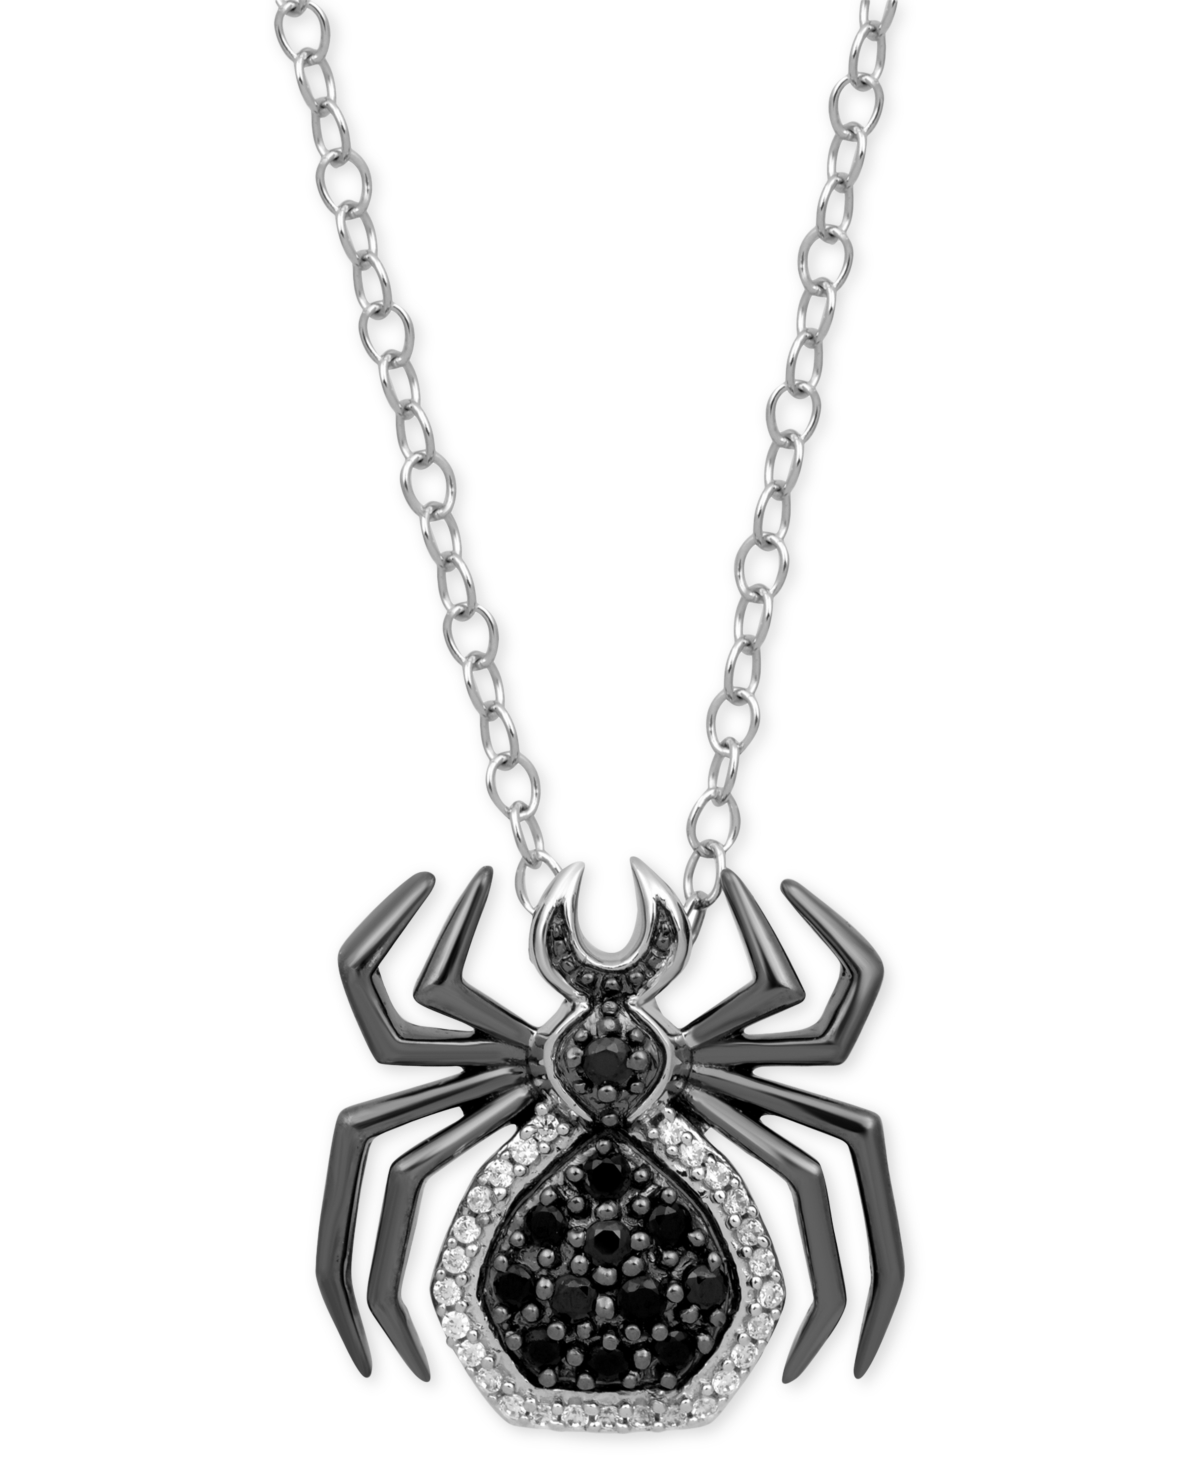 Black & White Diamond Spider Pendant Necklace (1/6 ct. t.w.) in Sterling Silver & Black Rhodium-Plate, 16" + 2" extender